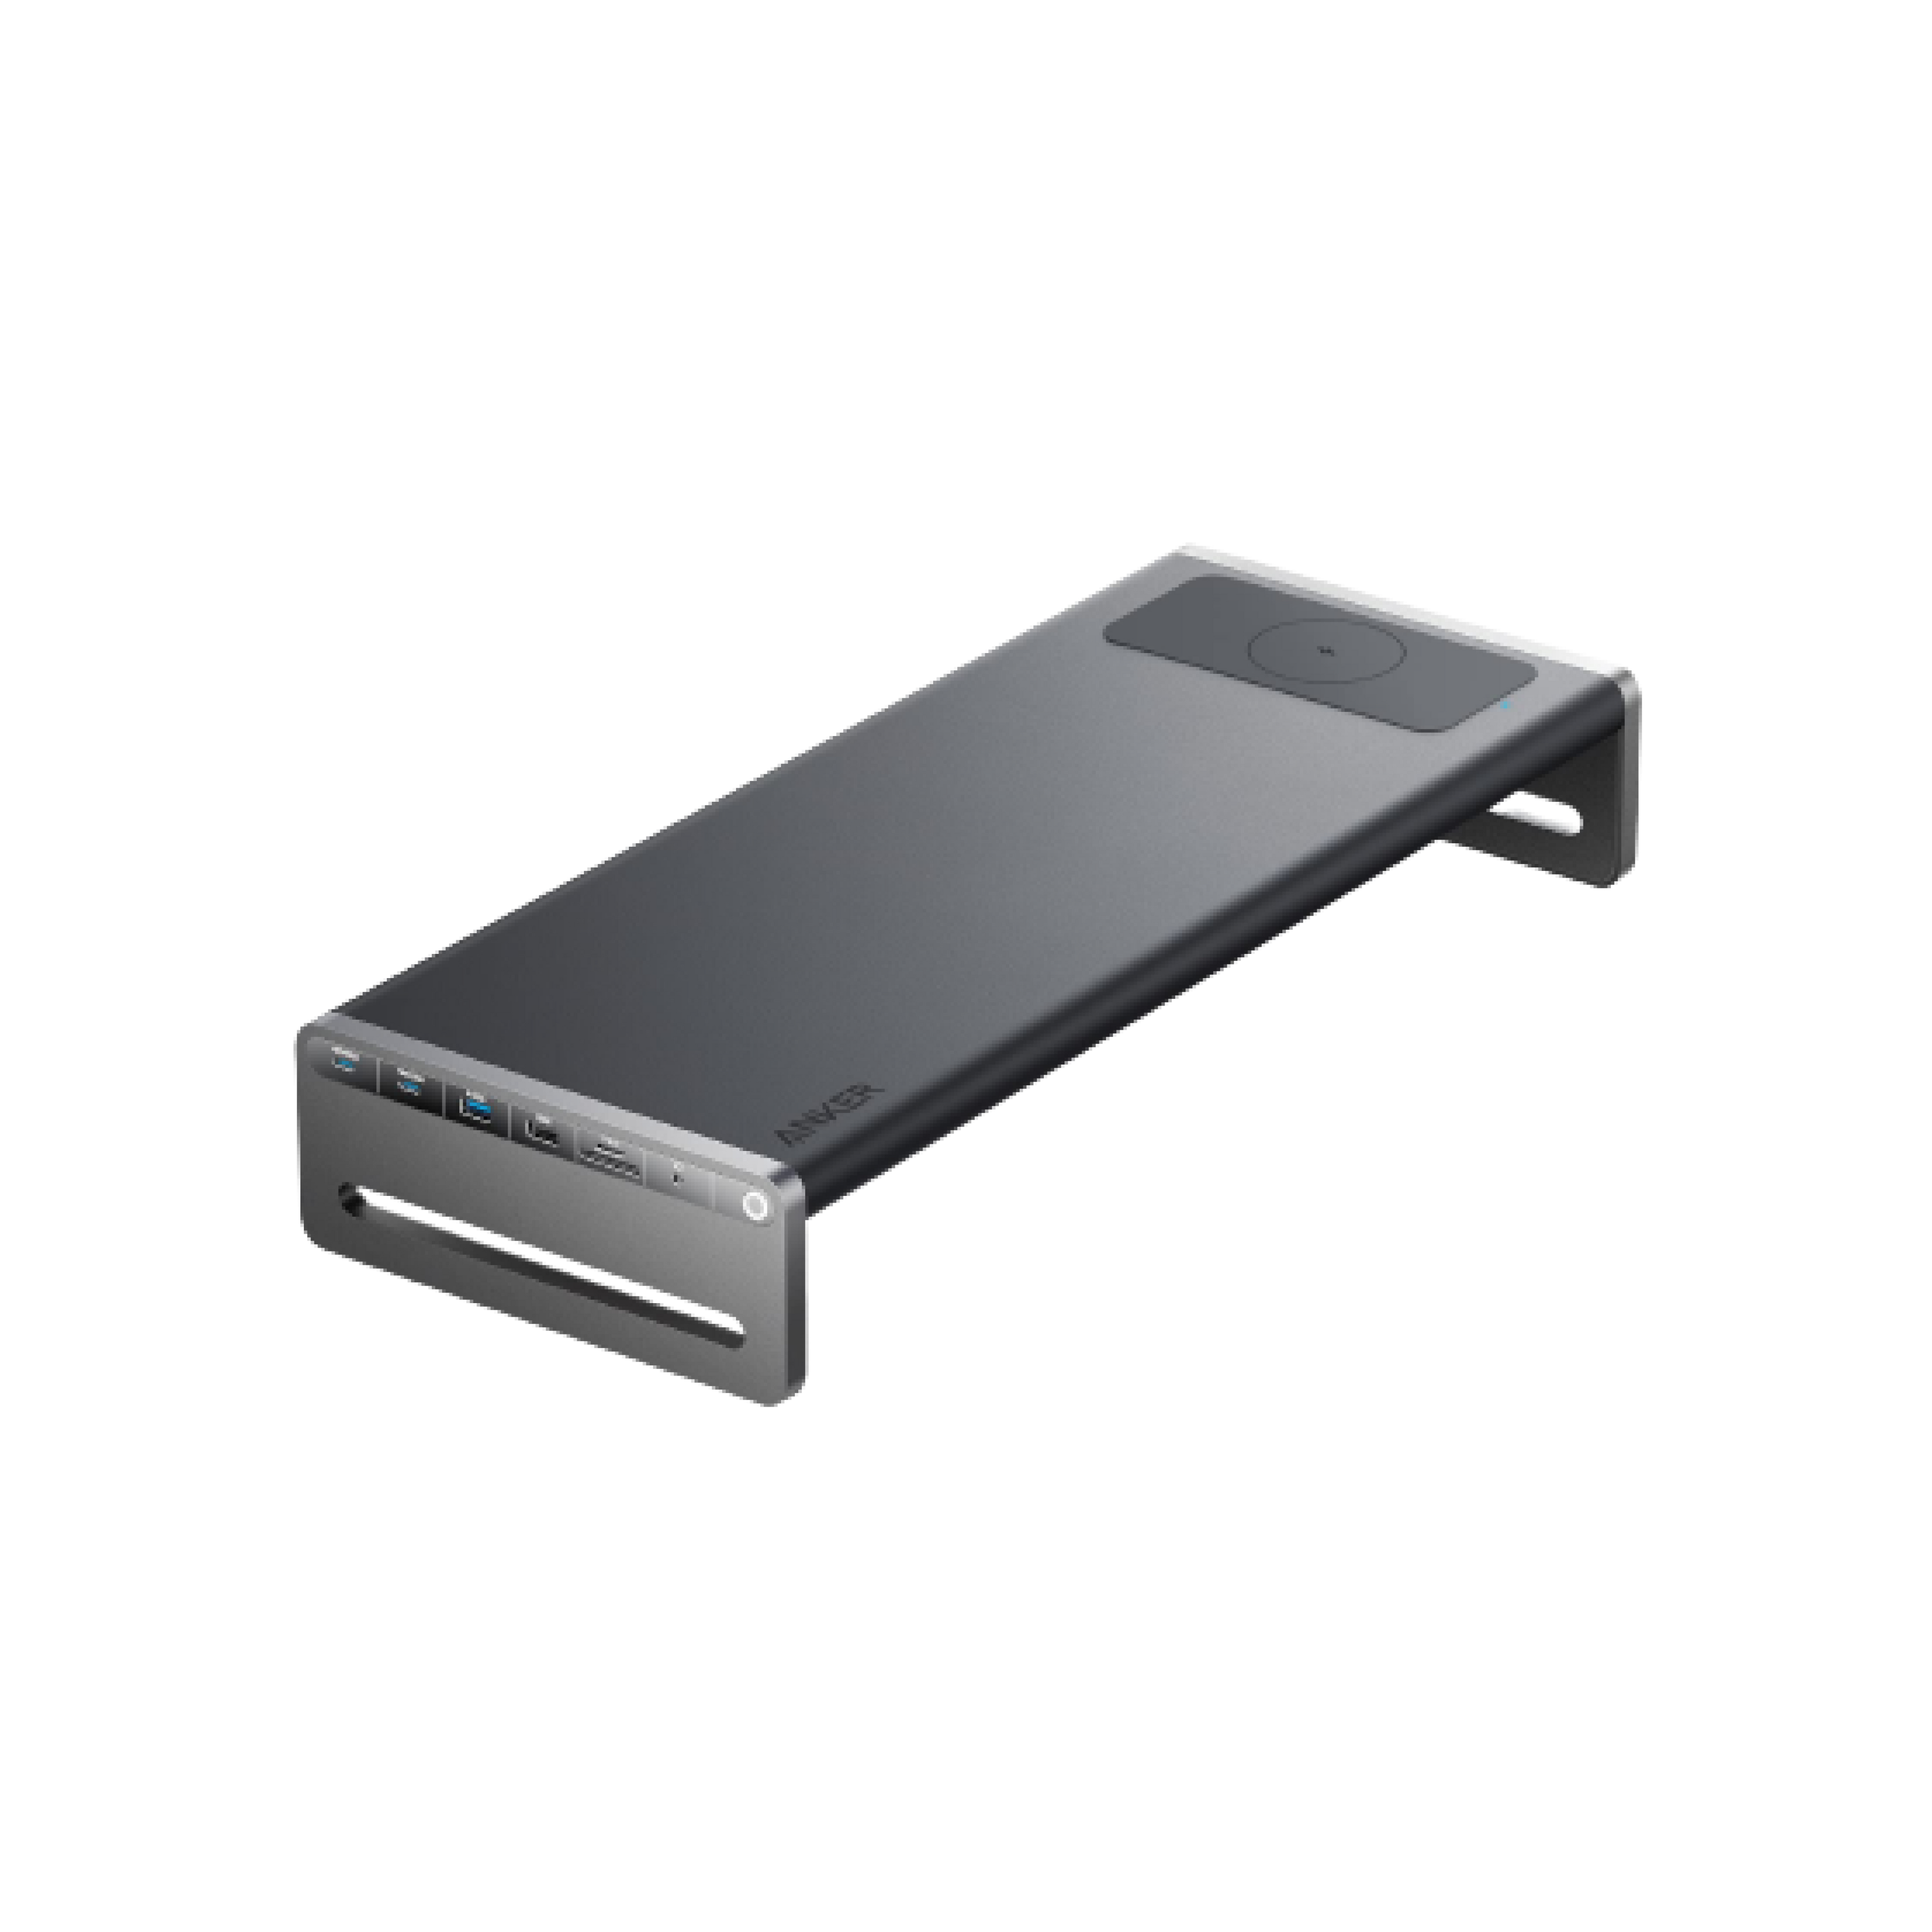 Anker <b>675</b> USB-C Docking Station (12-in-1, Monitor Stand, Wireless)